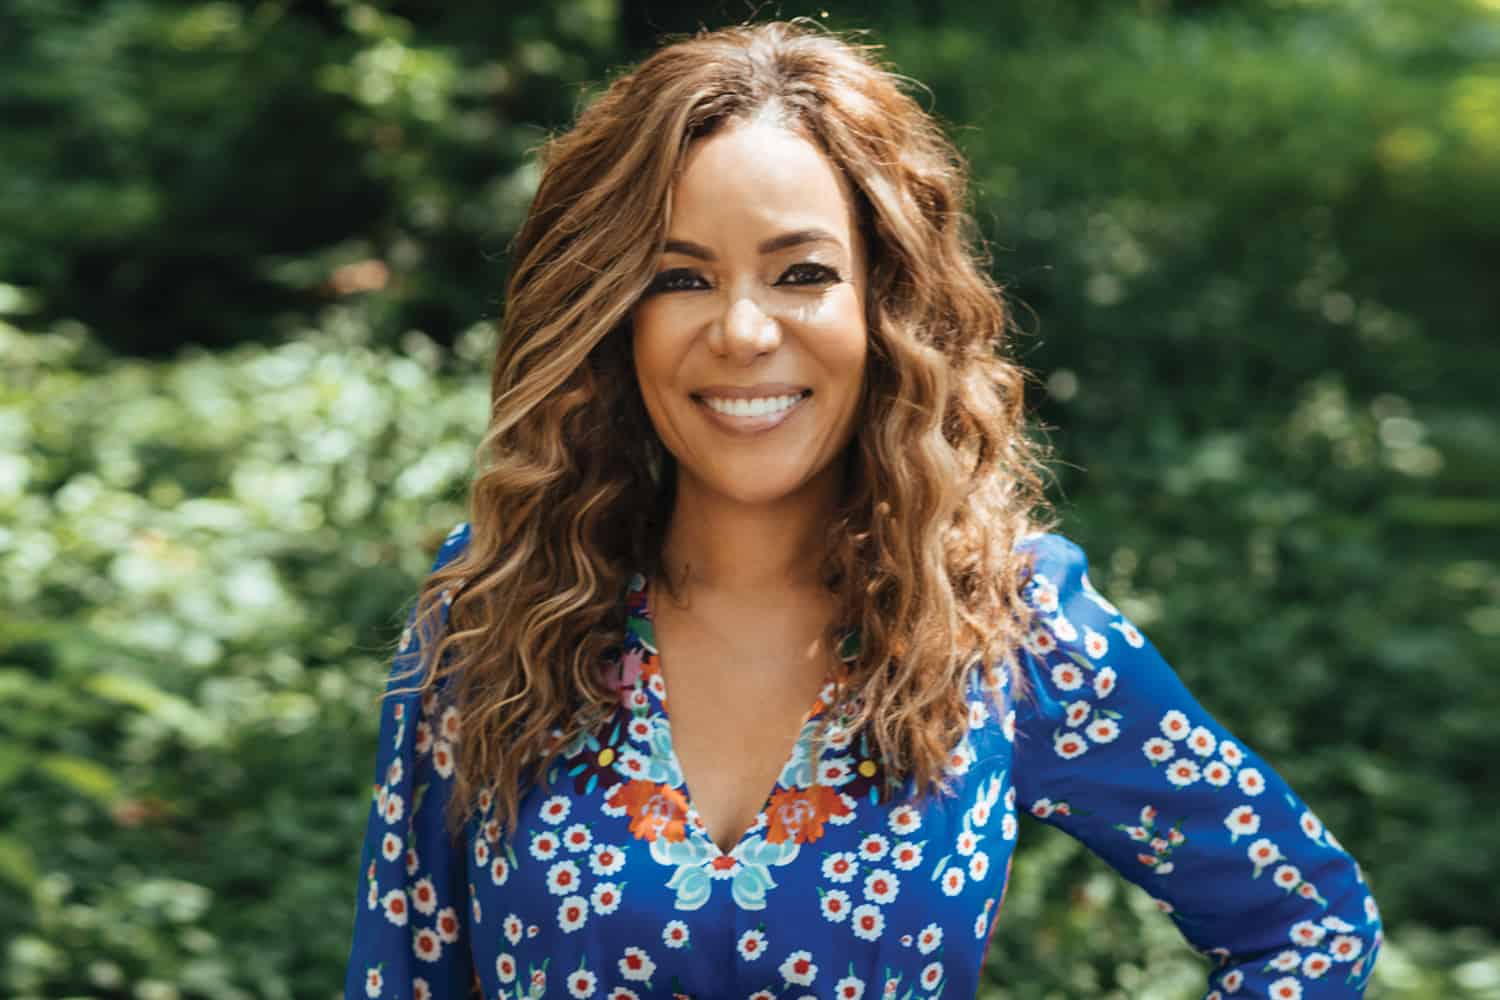 The View's Sunny Hostin Shares Her Guide to the Hamptons